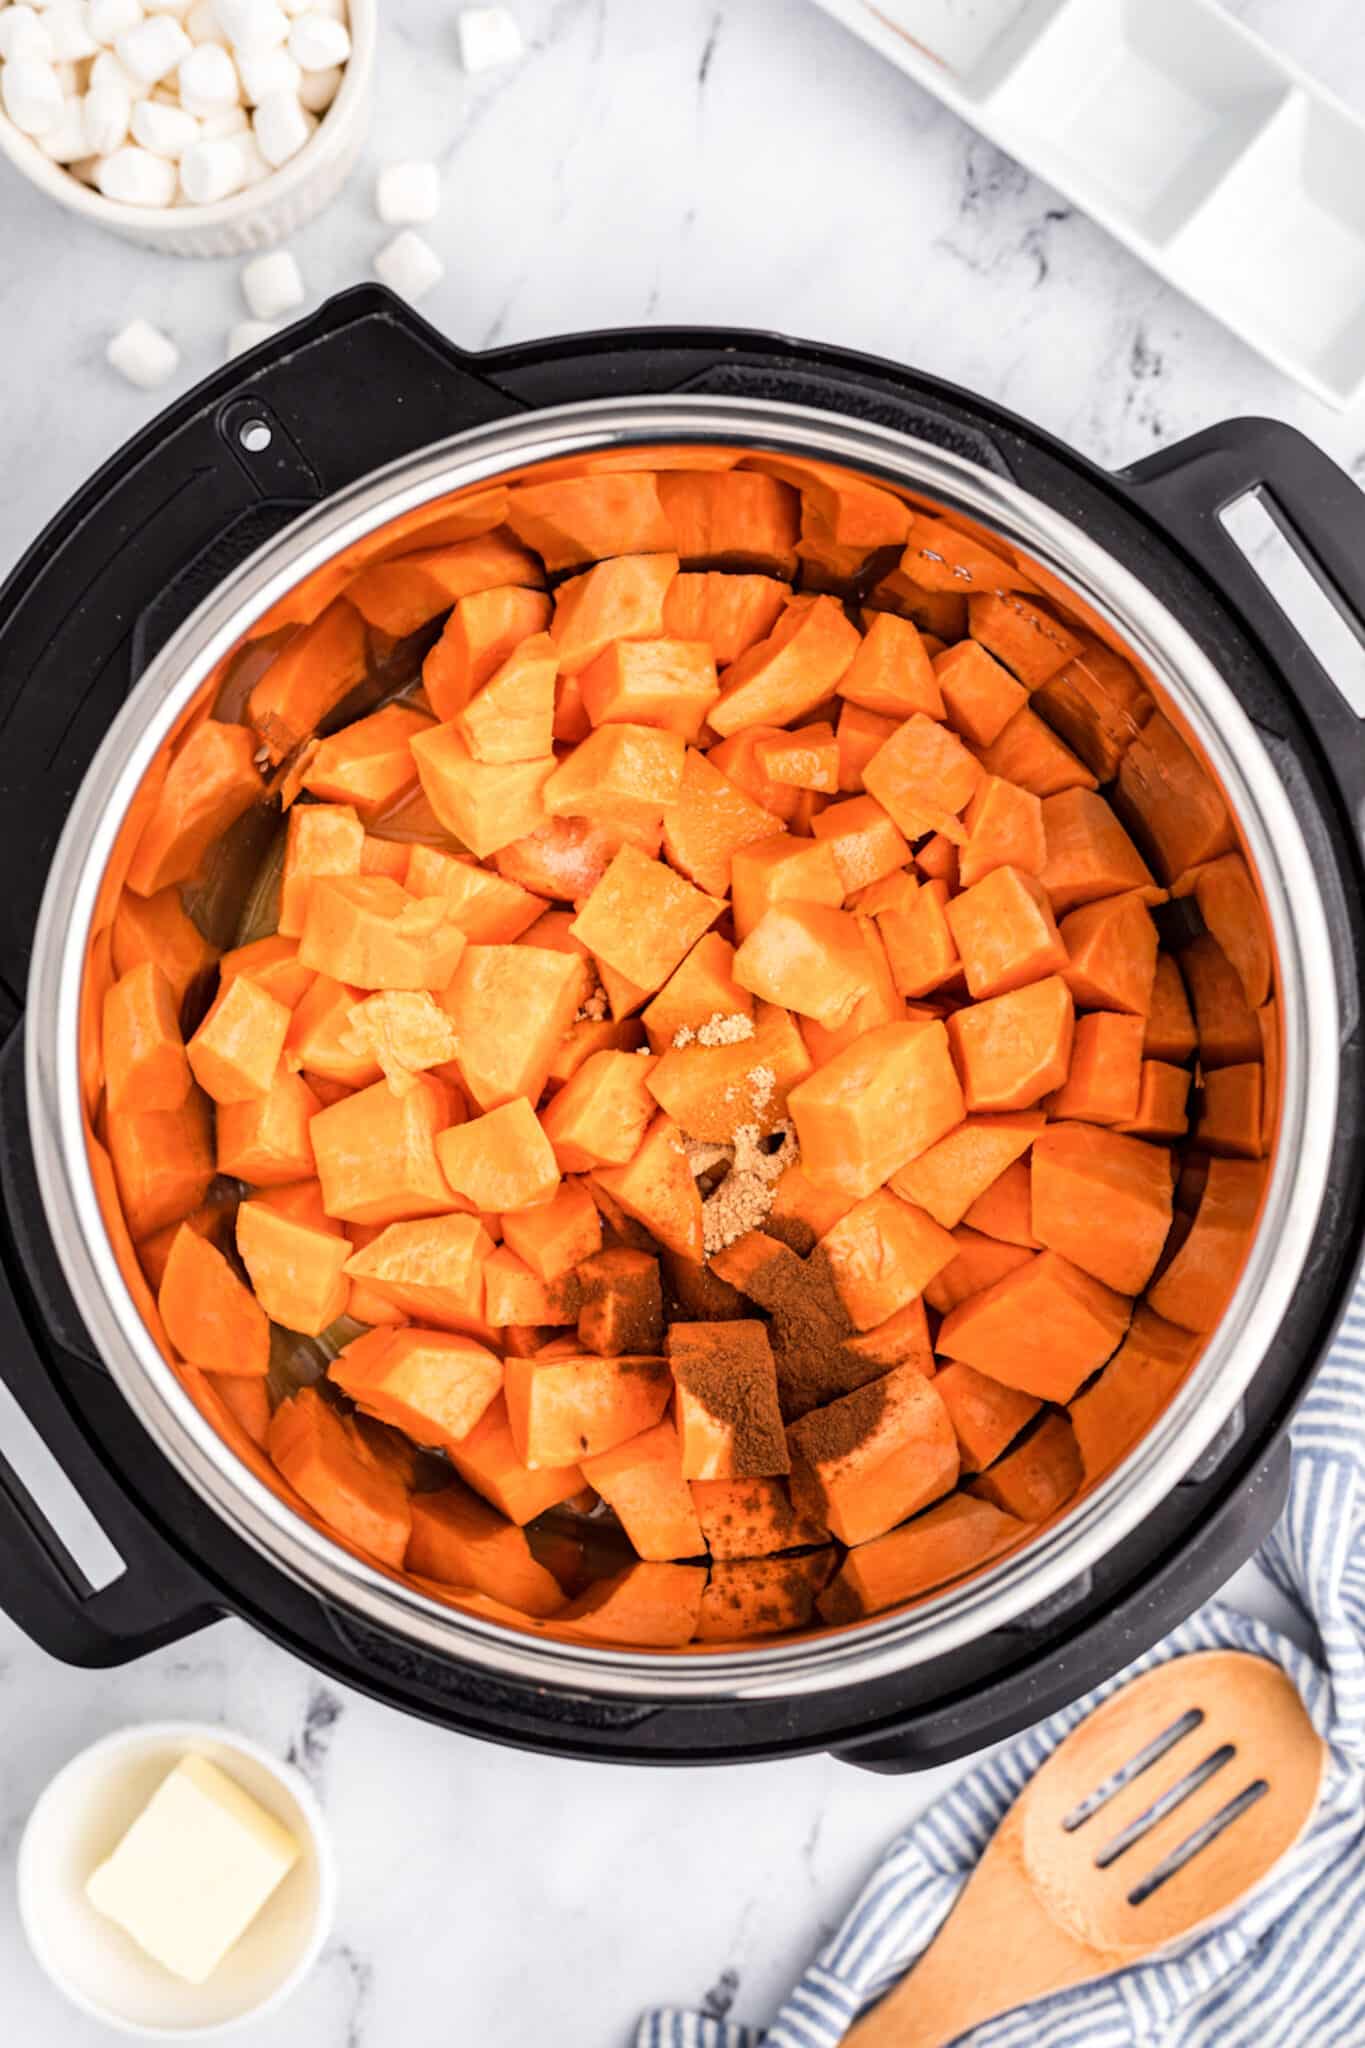 Diced yams in the insert of an Instant Pot.